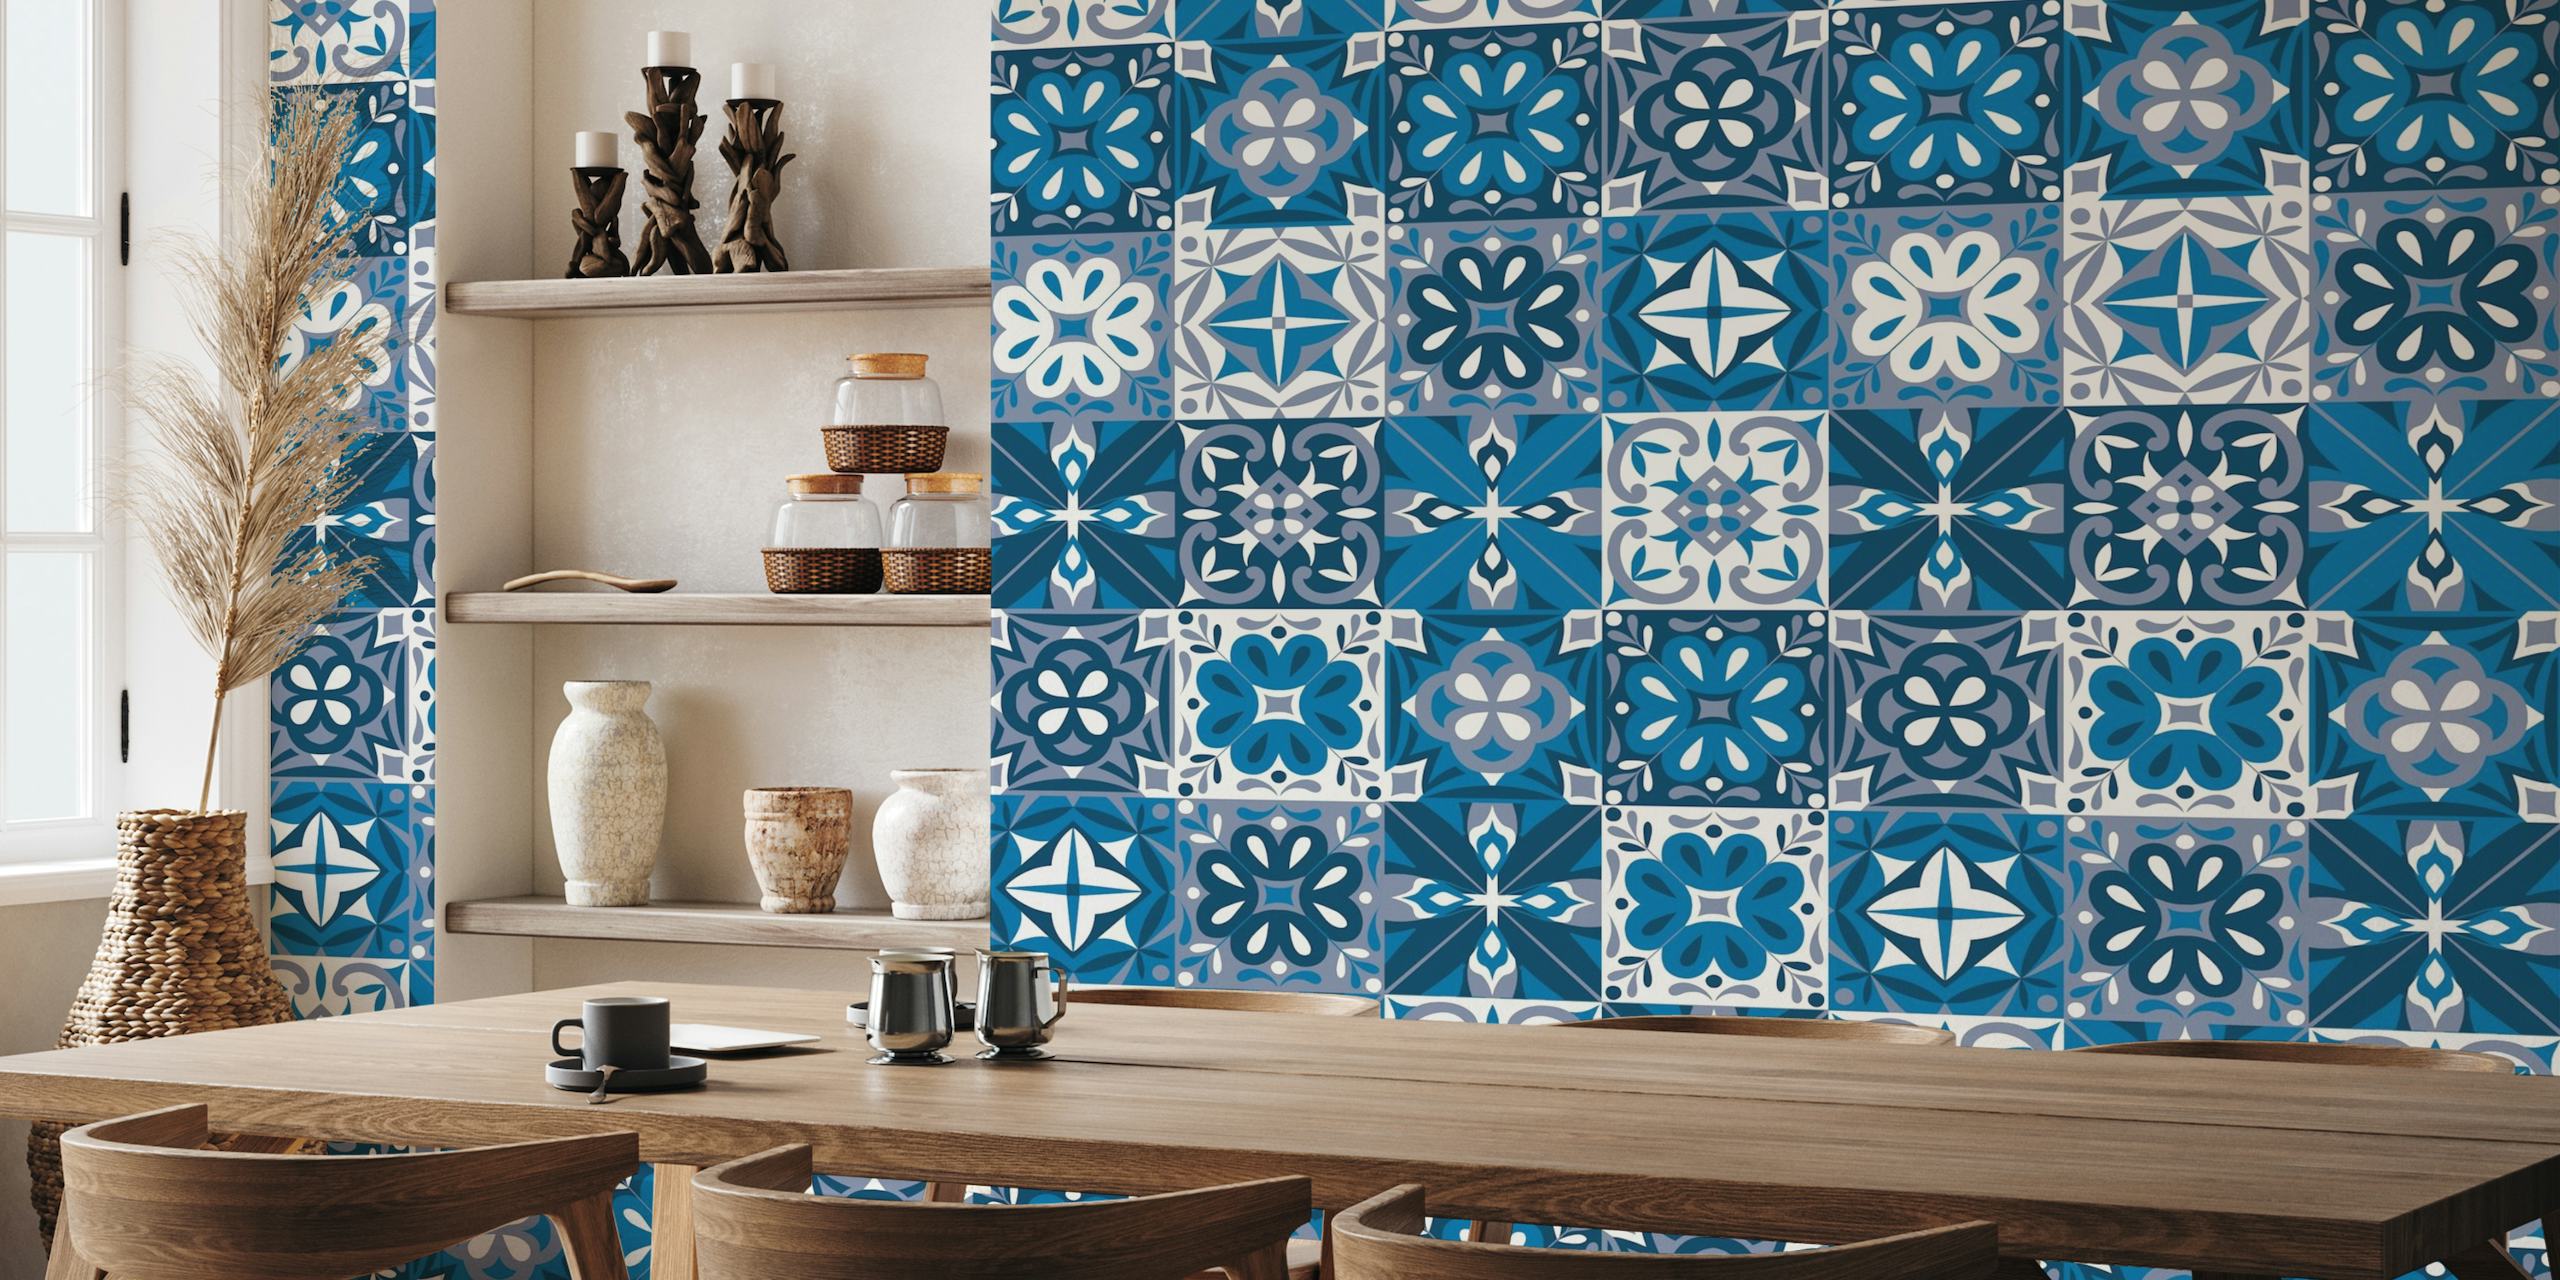 Portuguese Azulejo Tile pattern in blue and white on a wall mural